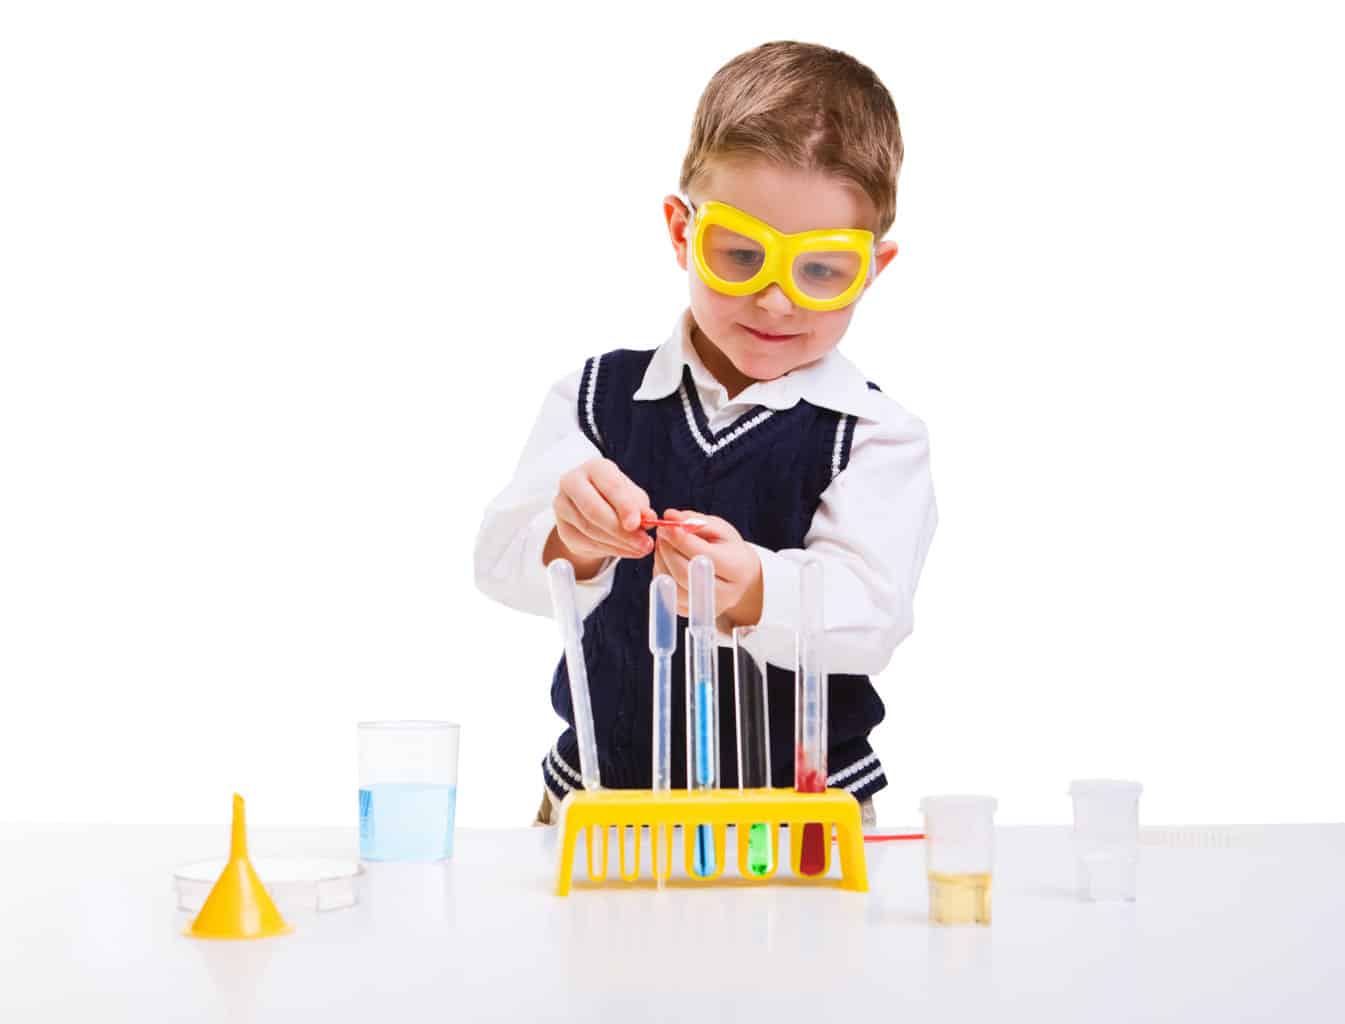 stem activities for 3-5 year olds, Young boy performing chemistry experiments with different liquids.